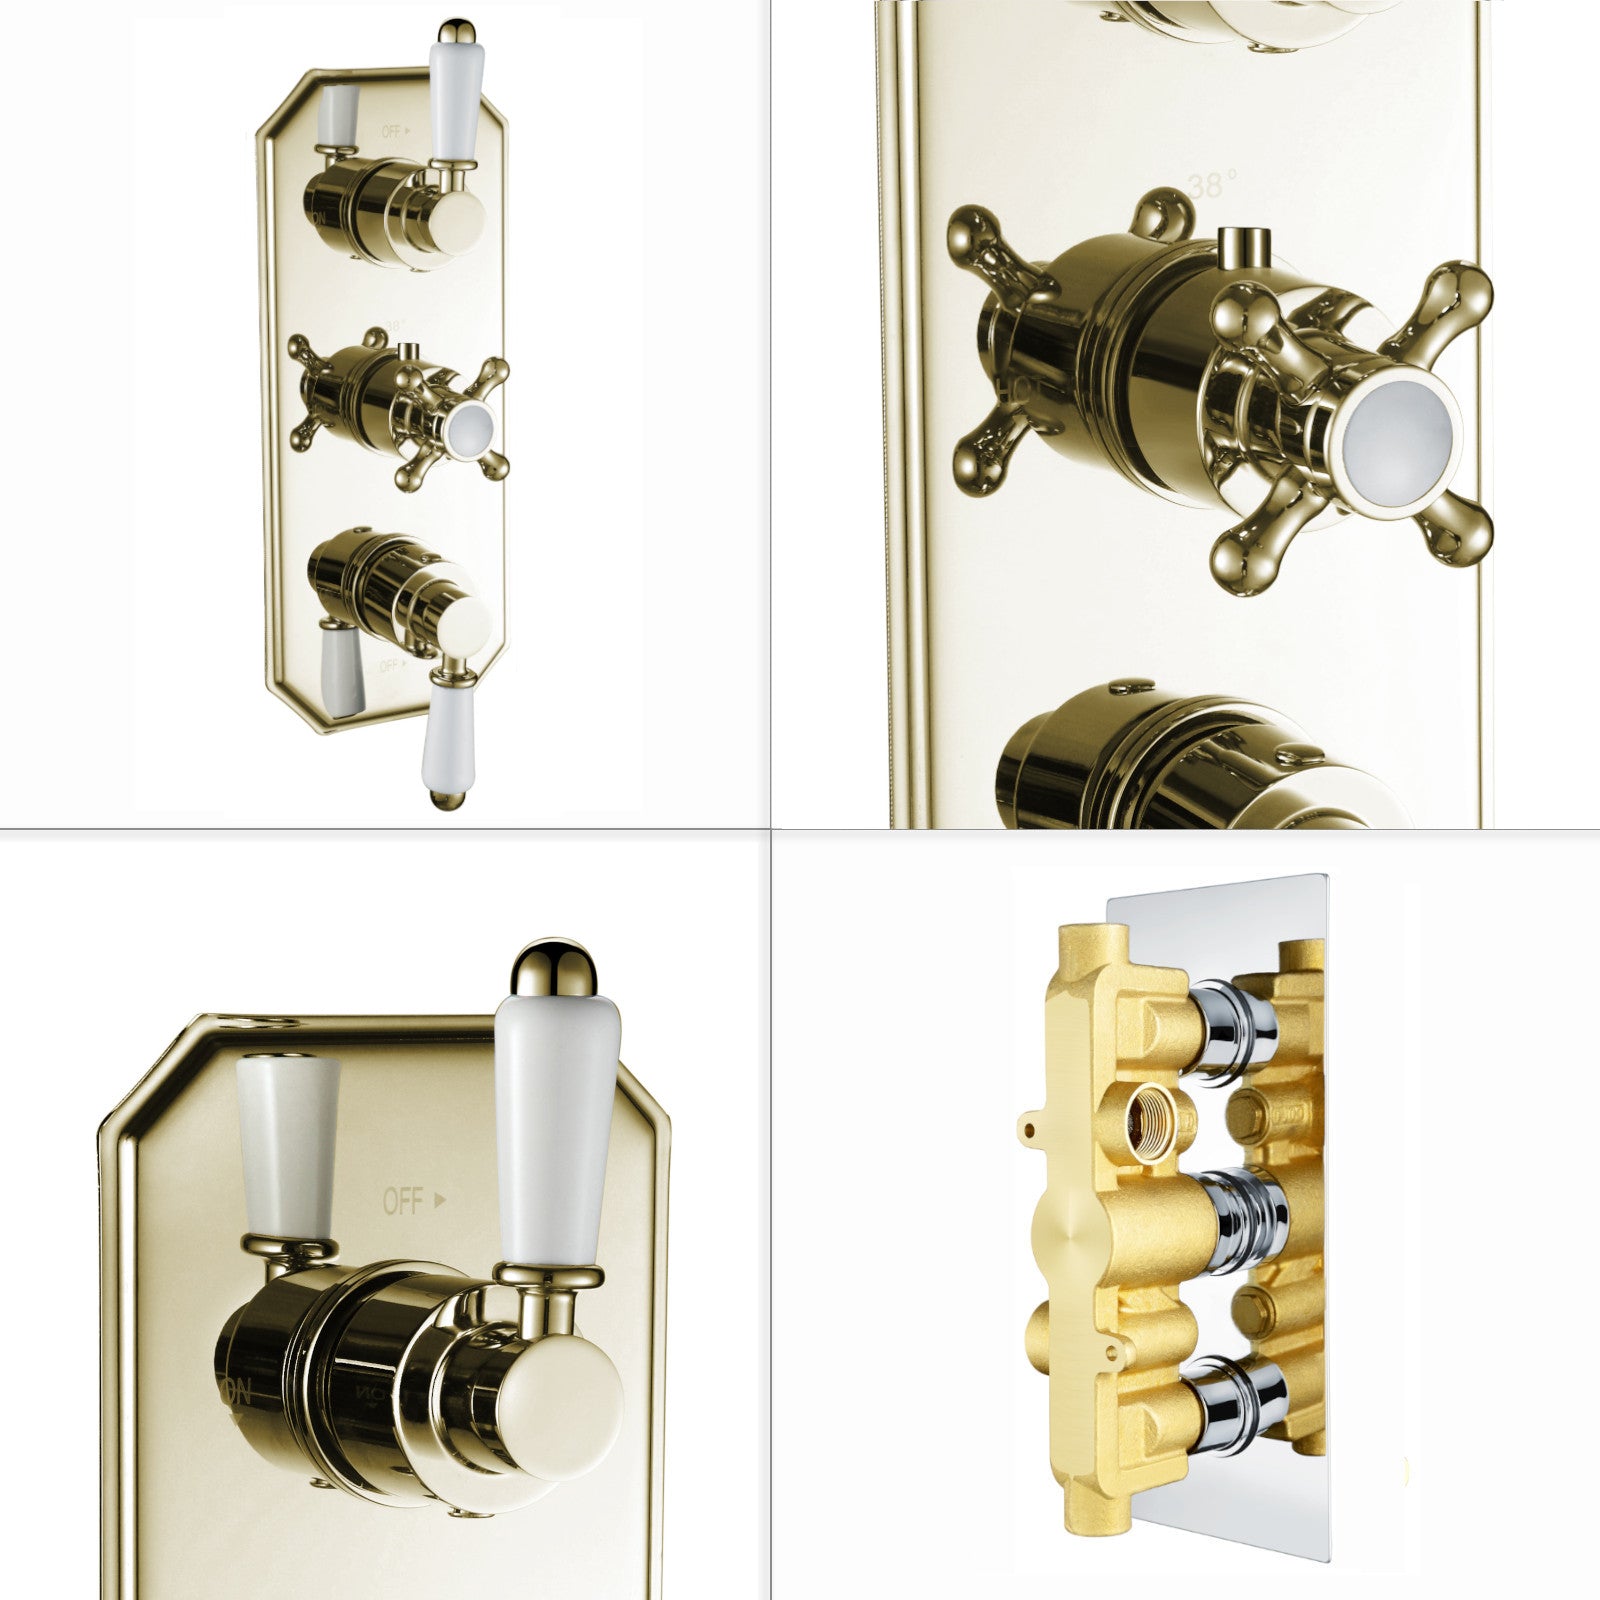 Regent traditional crosshead and white lever concealed thermostatic triple shower valve with 2 outlets - English gold - Showers